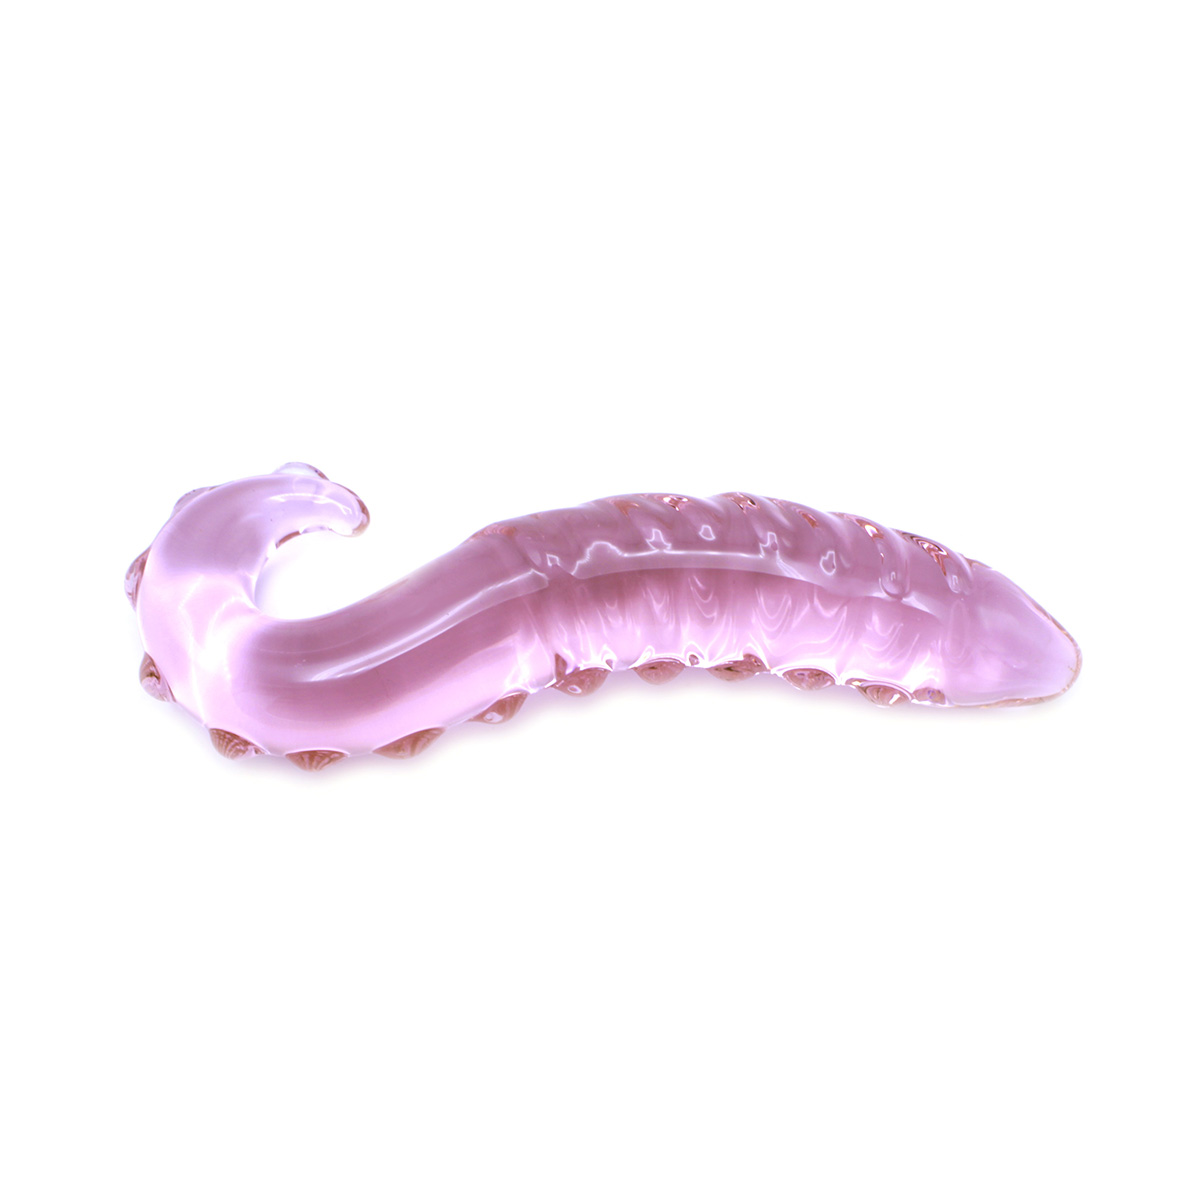 Pink-Tentacle-Glass-Dildo-OPR-2820063-4